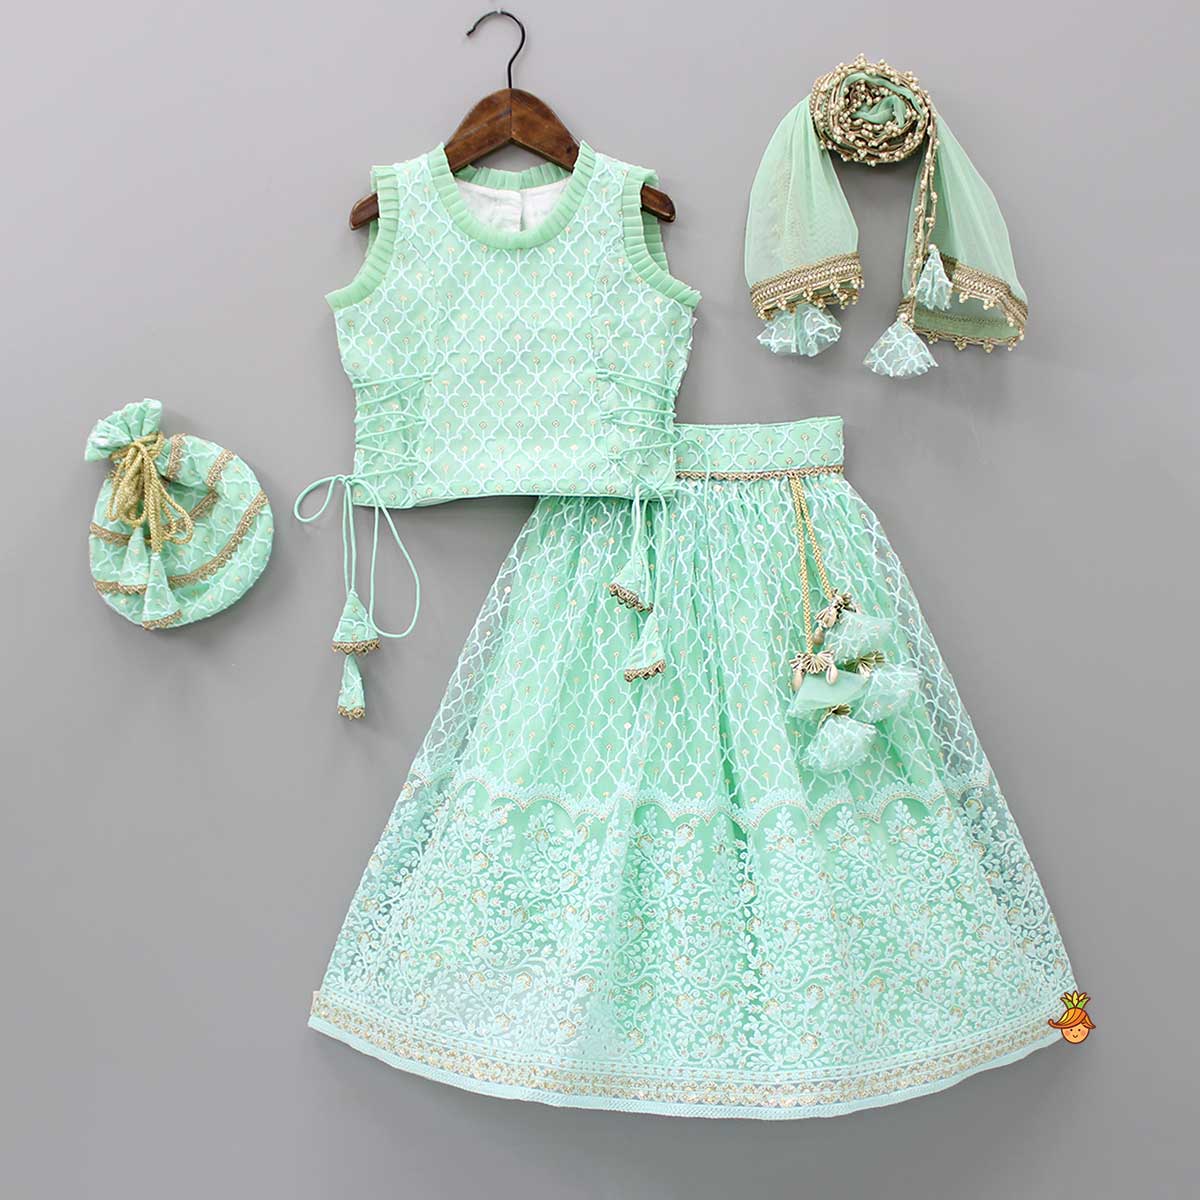 Sequins Thread Embroidered Mint Green Top And Lehenga With Net Dupatta And Potli Bag